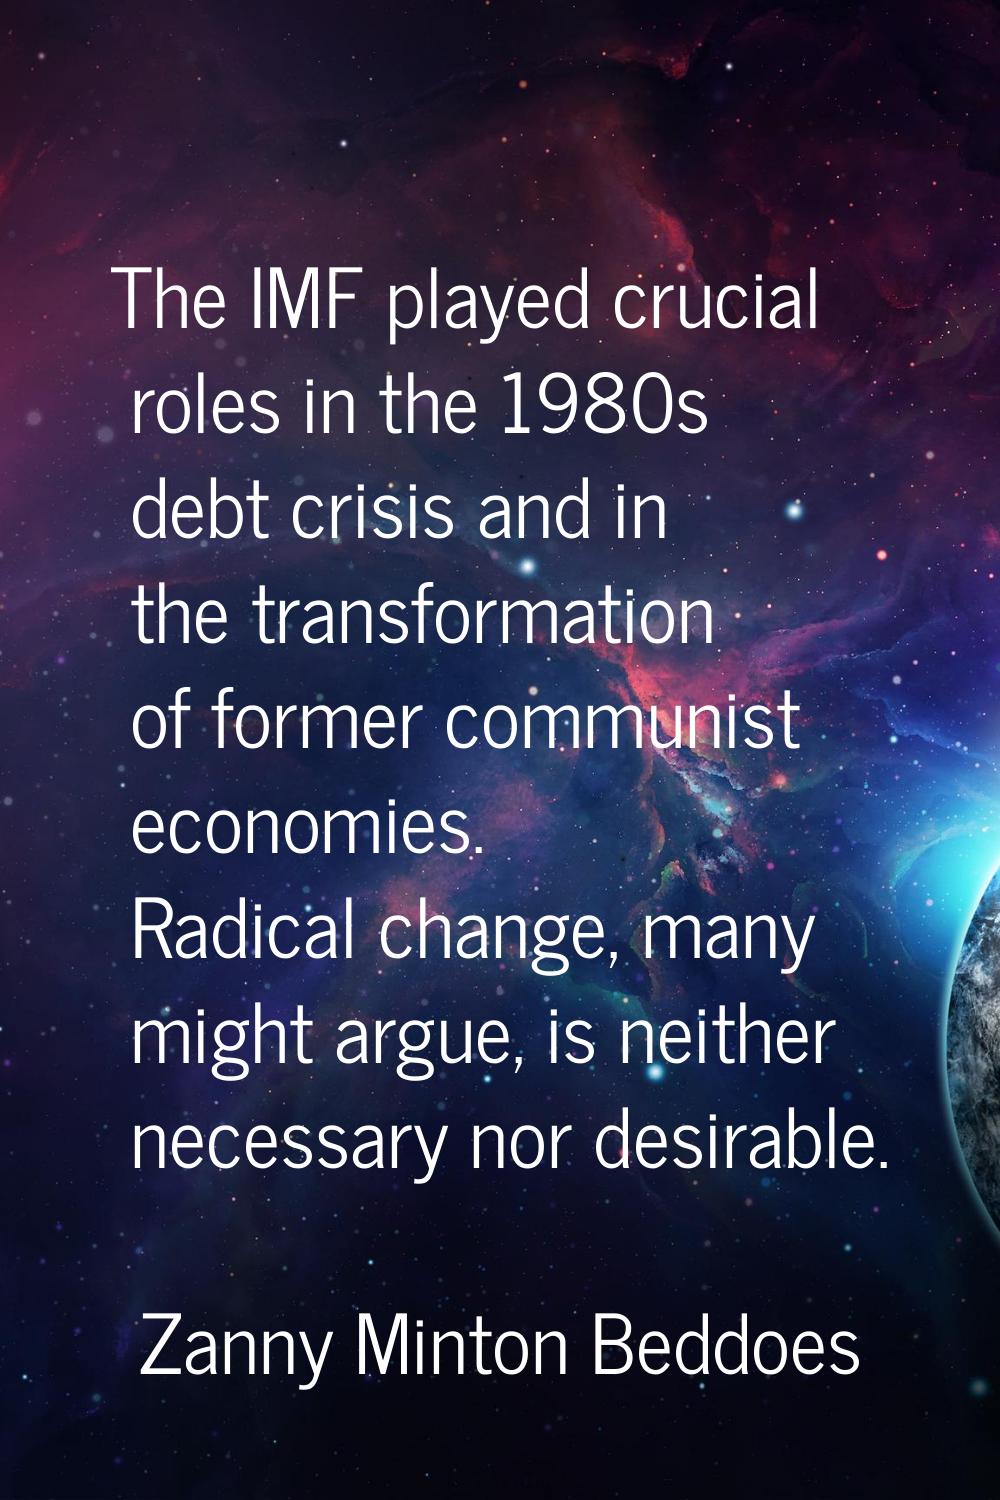 The IMF played crucial roles in the 1980s debt crisis and in the transformation of former communist